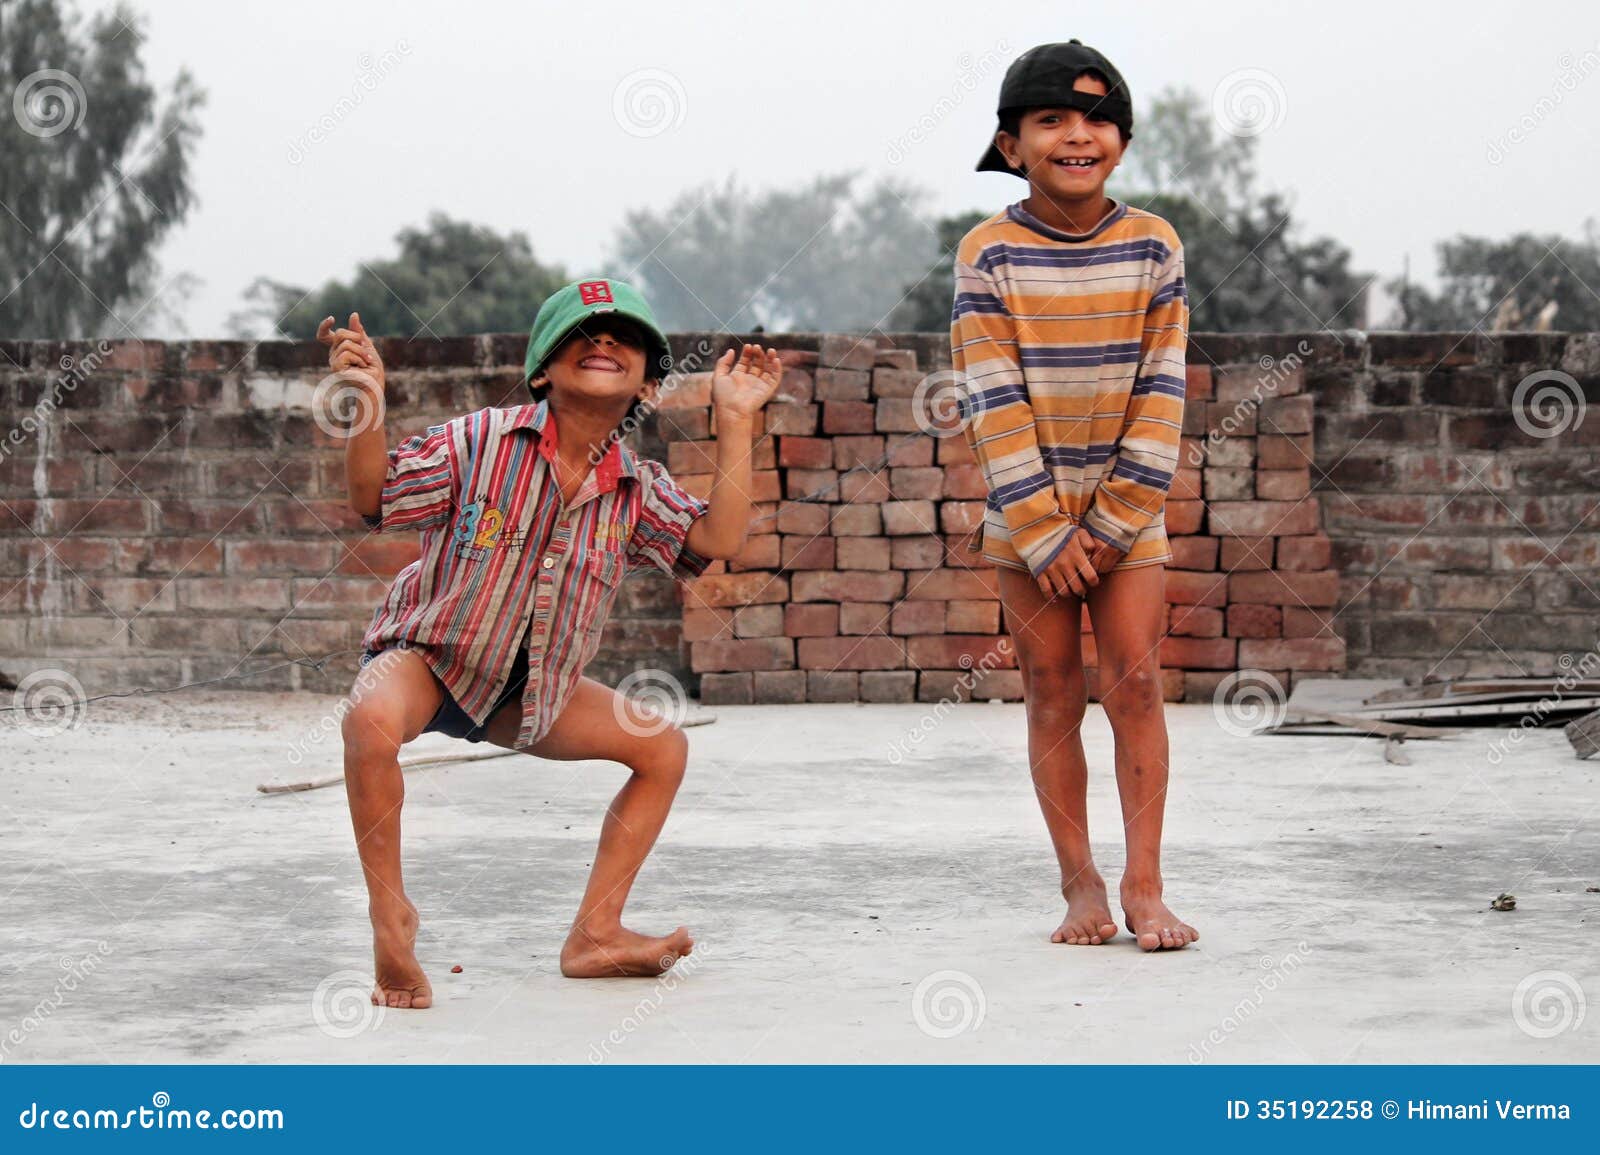 Indian Childhood stock photo. Image of clear, cheerful - 35192258